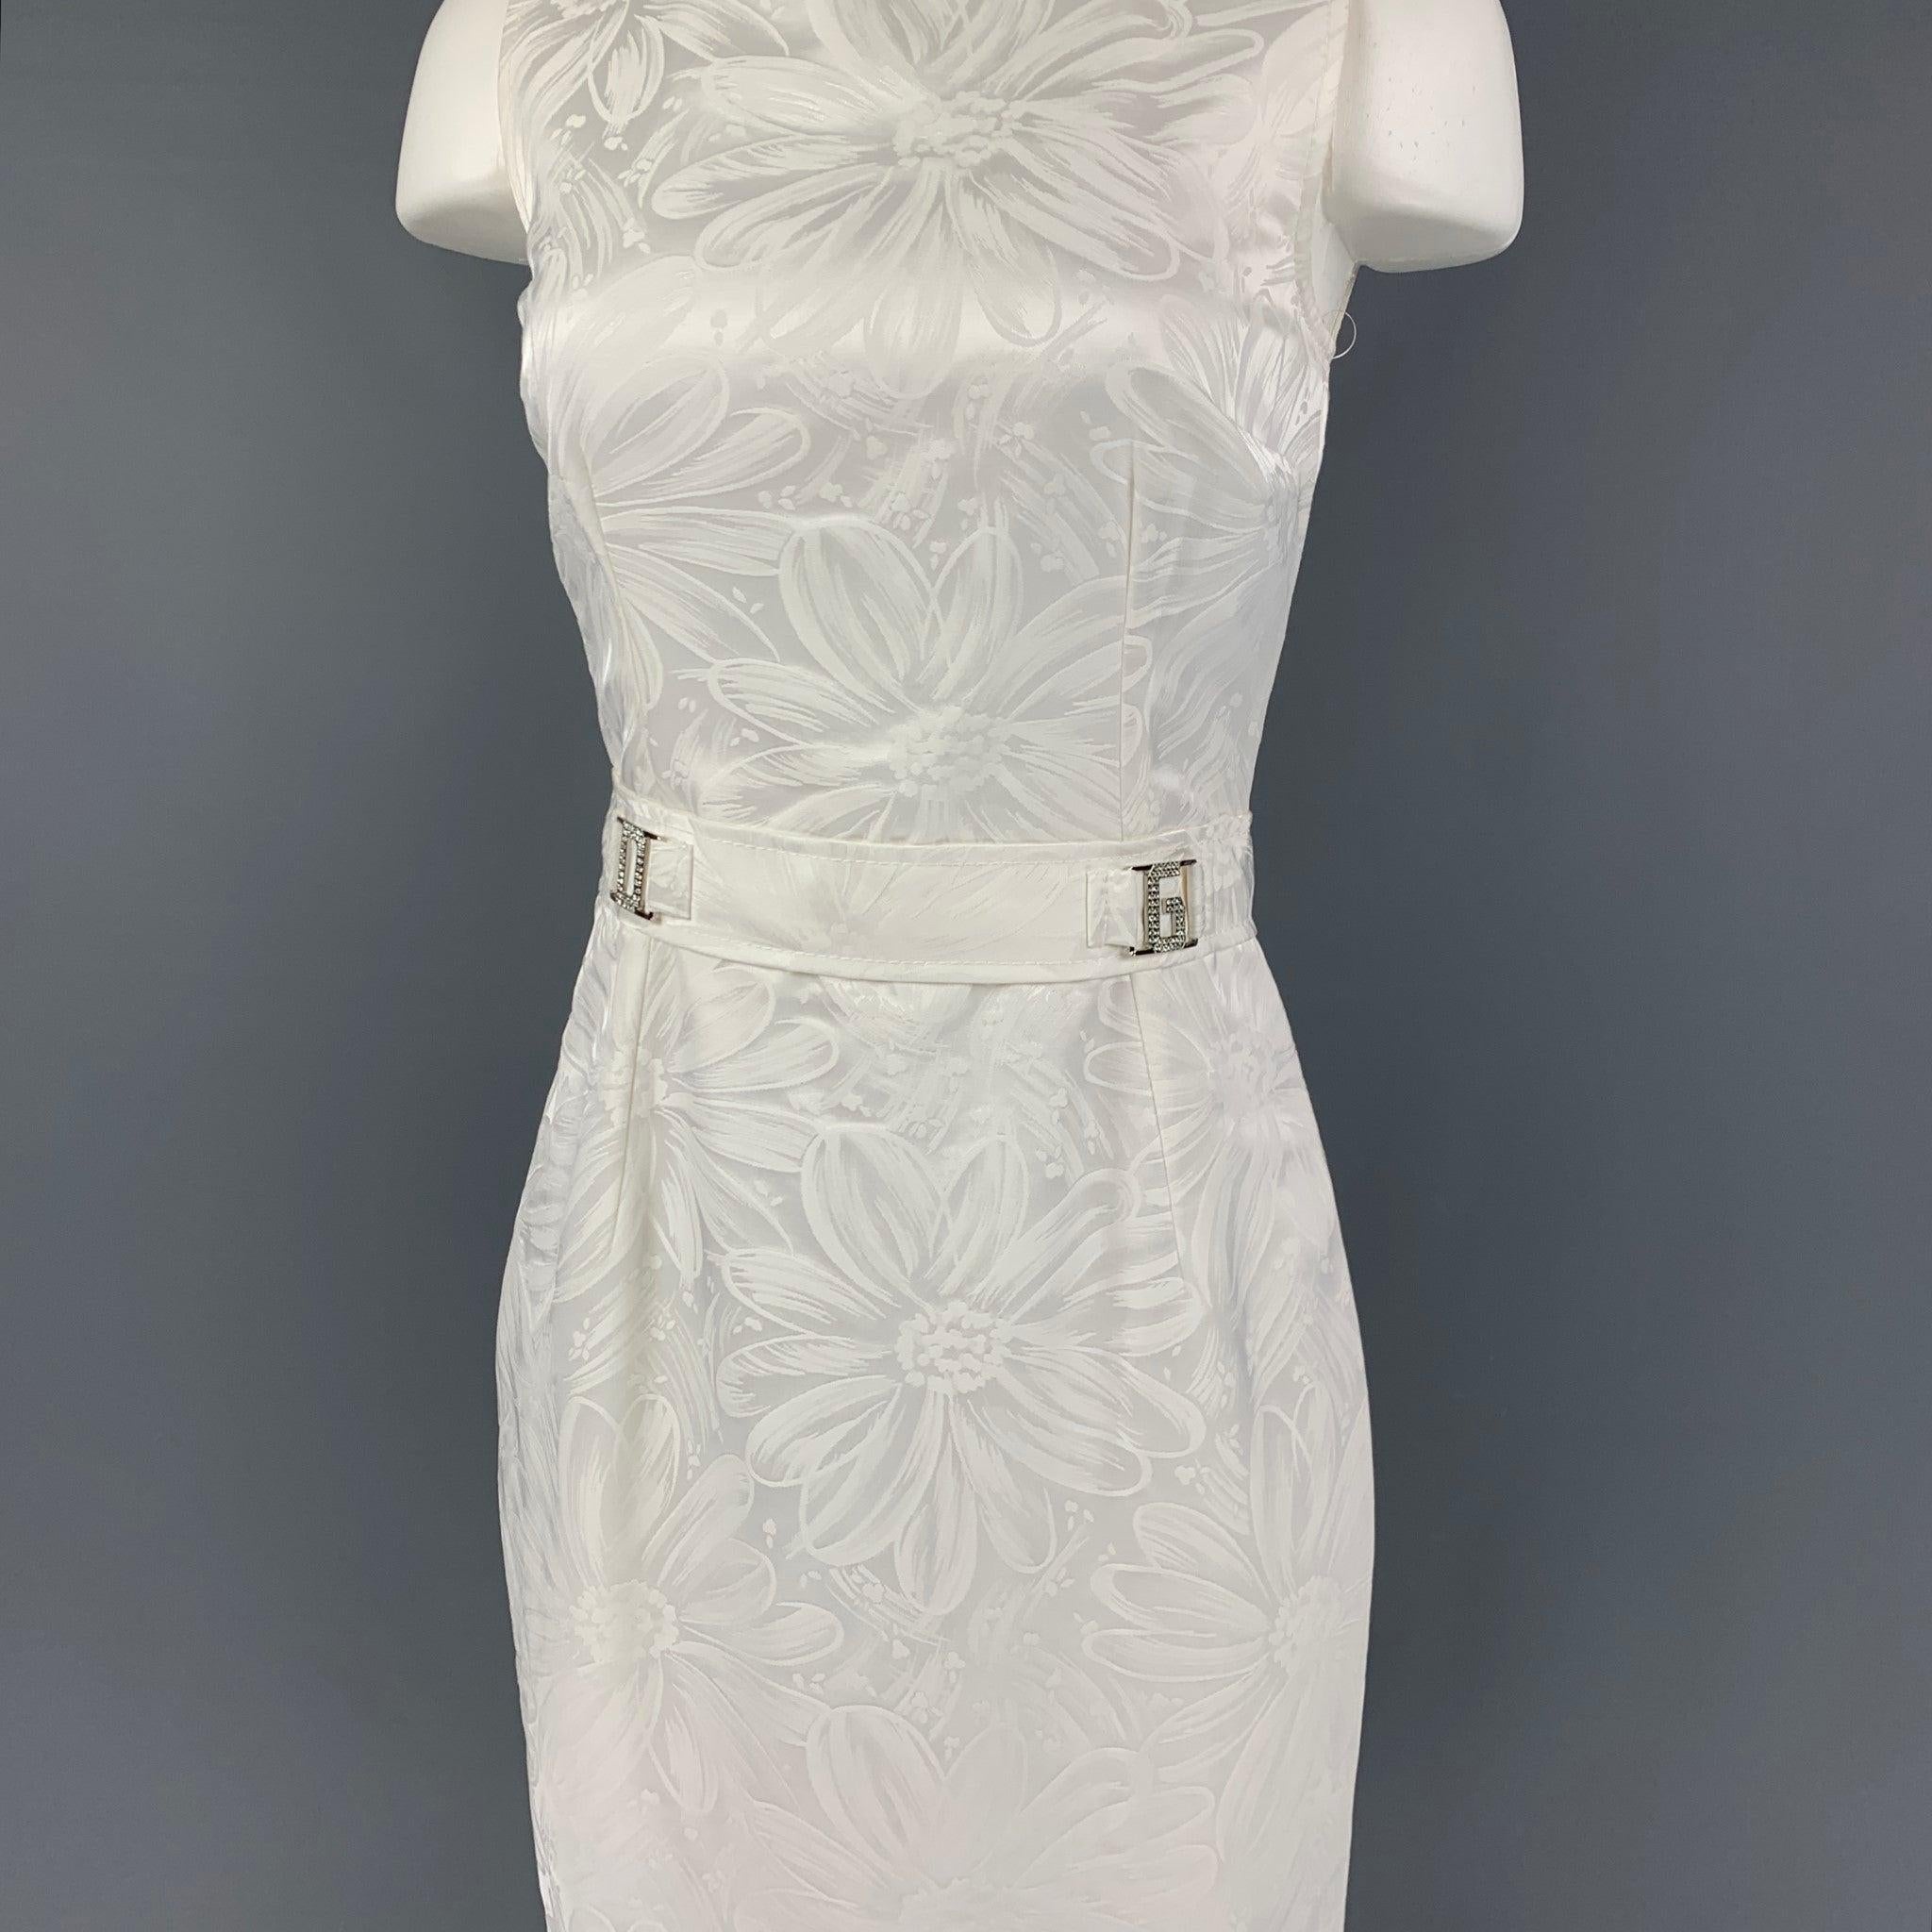 DOLCE & GABBANA dress comes in a white cotton featuring an a-line style, DG rhinestone detail, sleeveless, and a back zip up closure. Made in Italy.
New With Tags. 

Marked:   40 

Measurements: 
 
Shoulder: 13 inches  Bust: 30 inches  Waist: 26